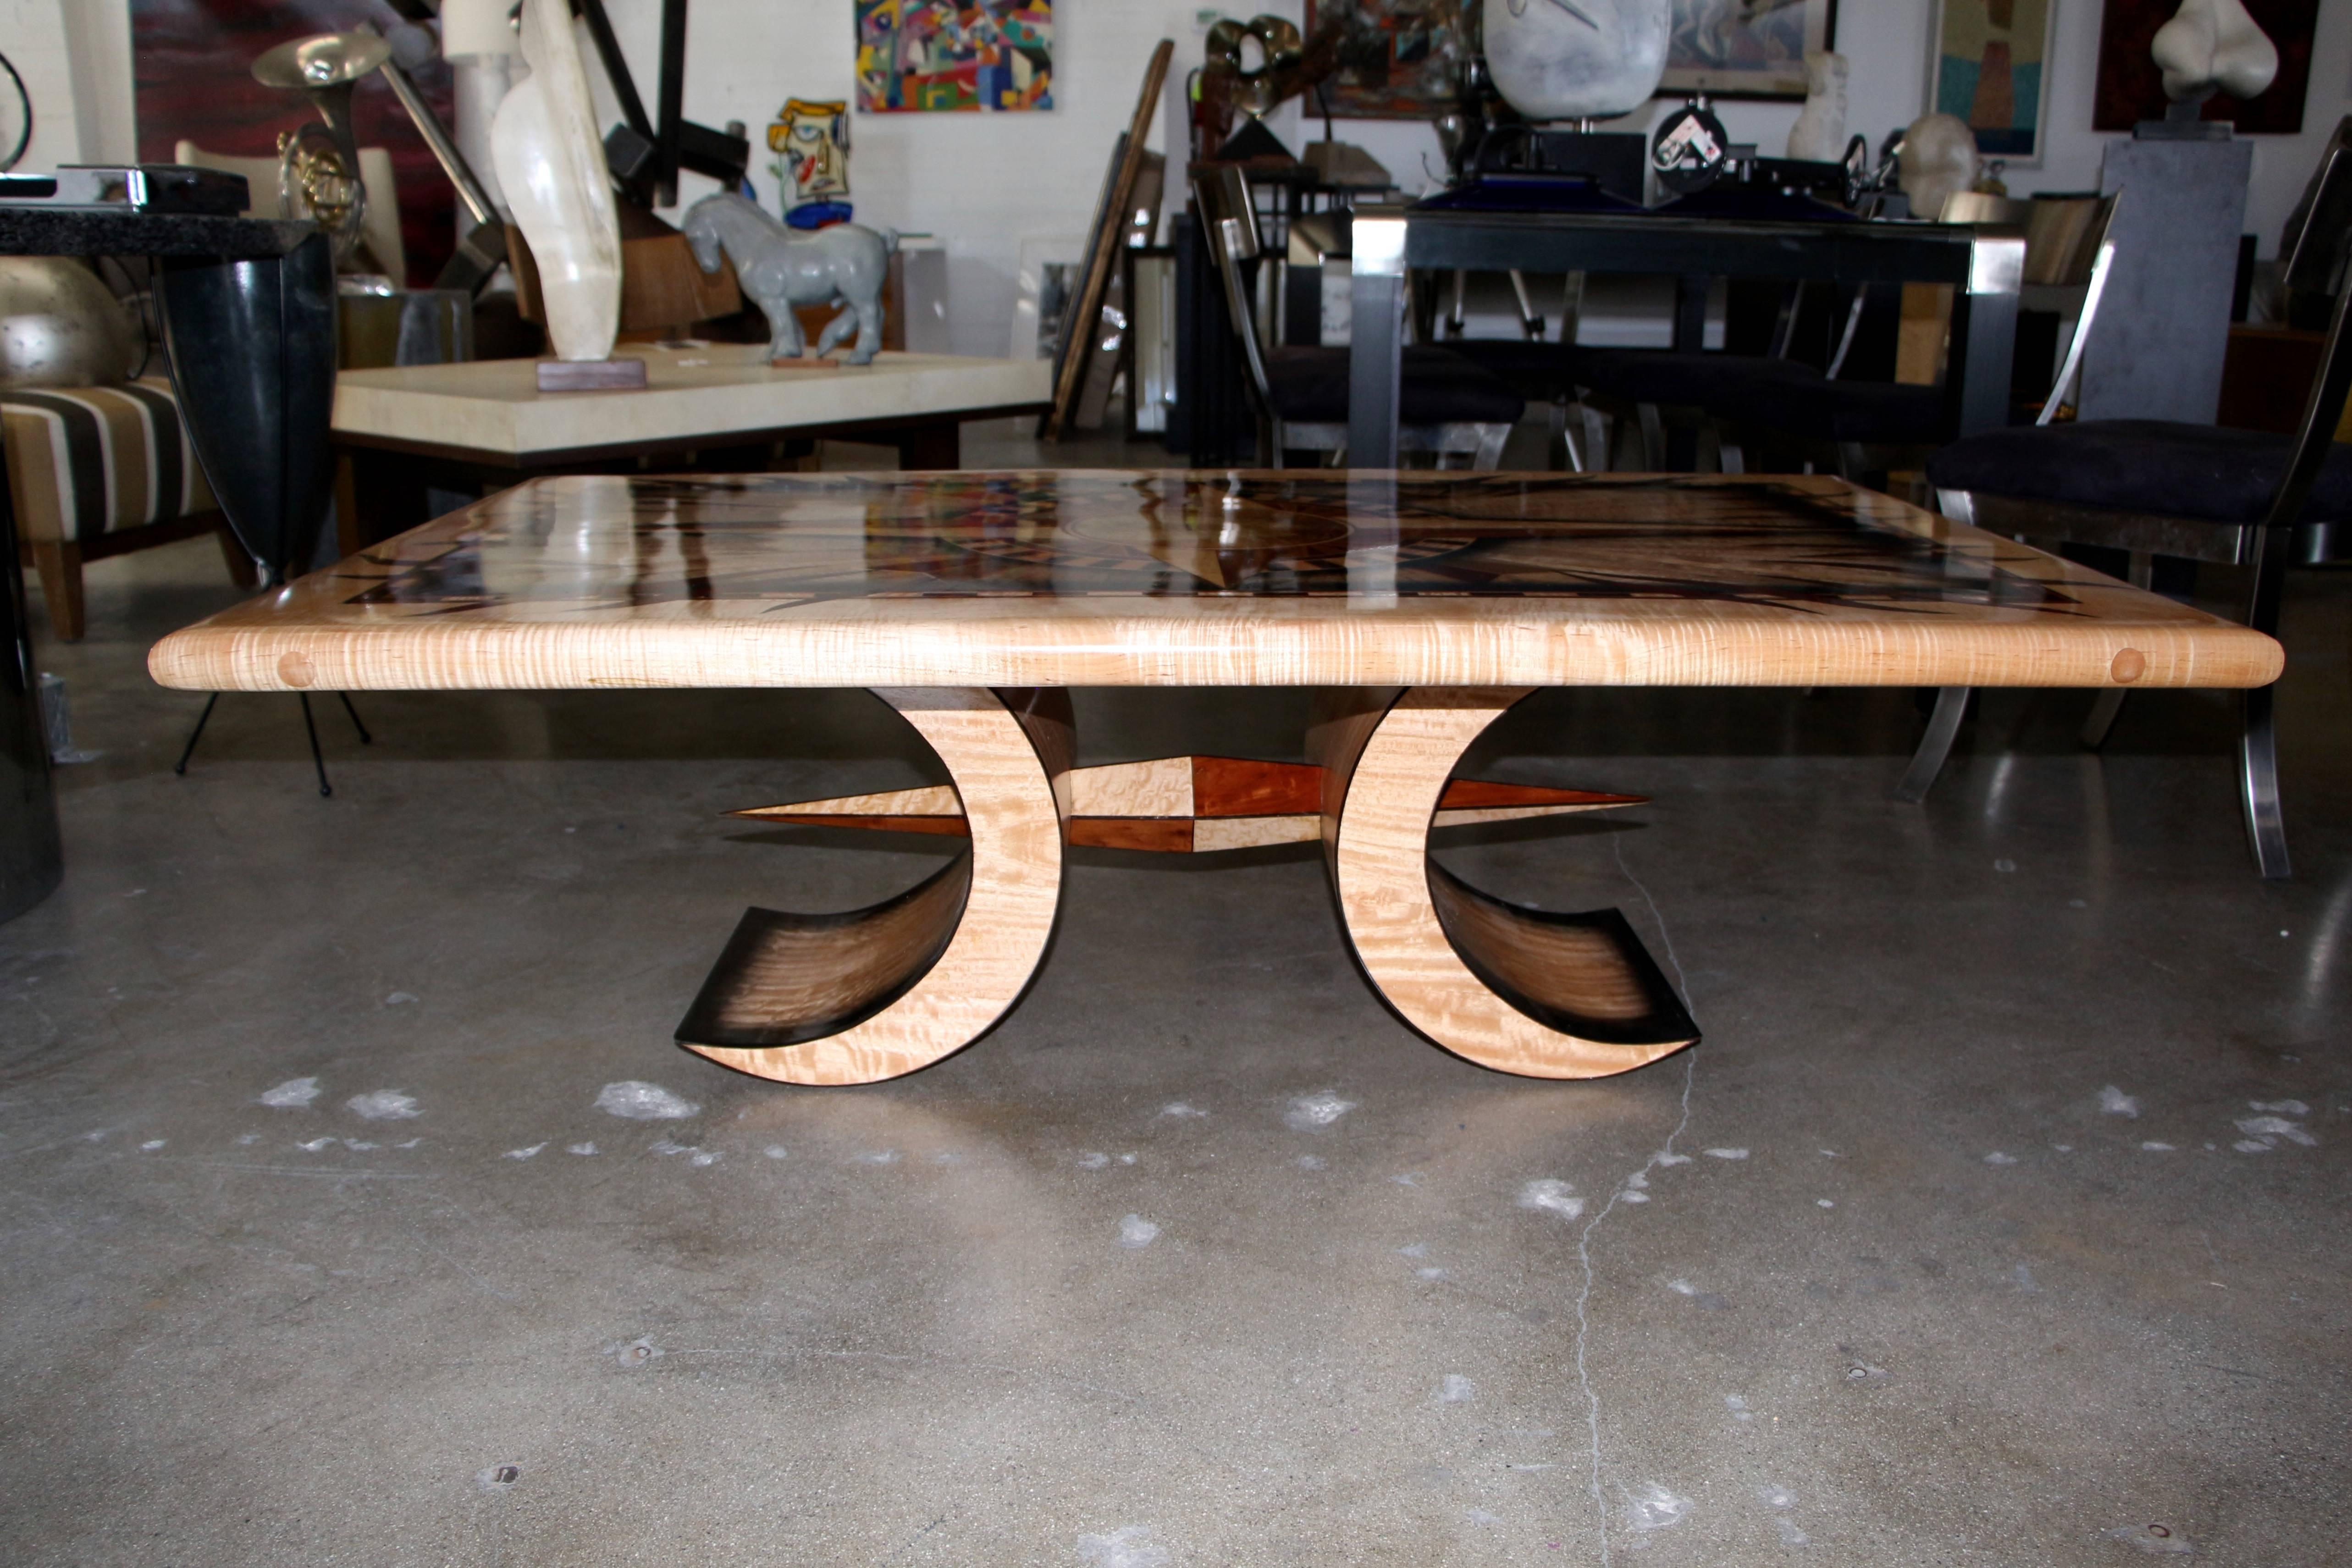 A beautifully made inlaid coffee table by a master wood worker Curtis Underwood. It is truly a spectacular piece made with all sorts of exotic woods, listed next to his signature on the underside. It is a one of a kind piece. Dated December 2011.